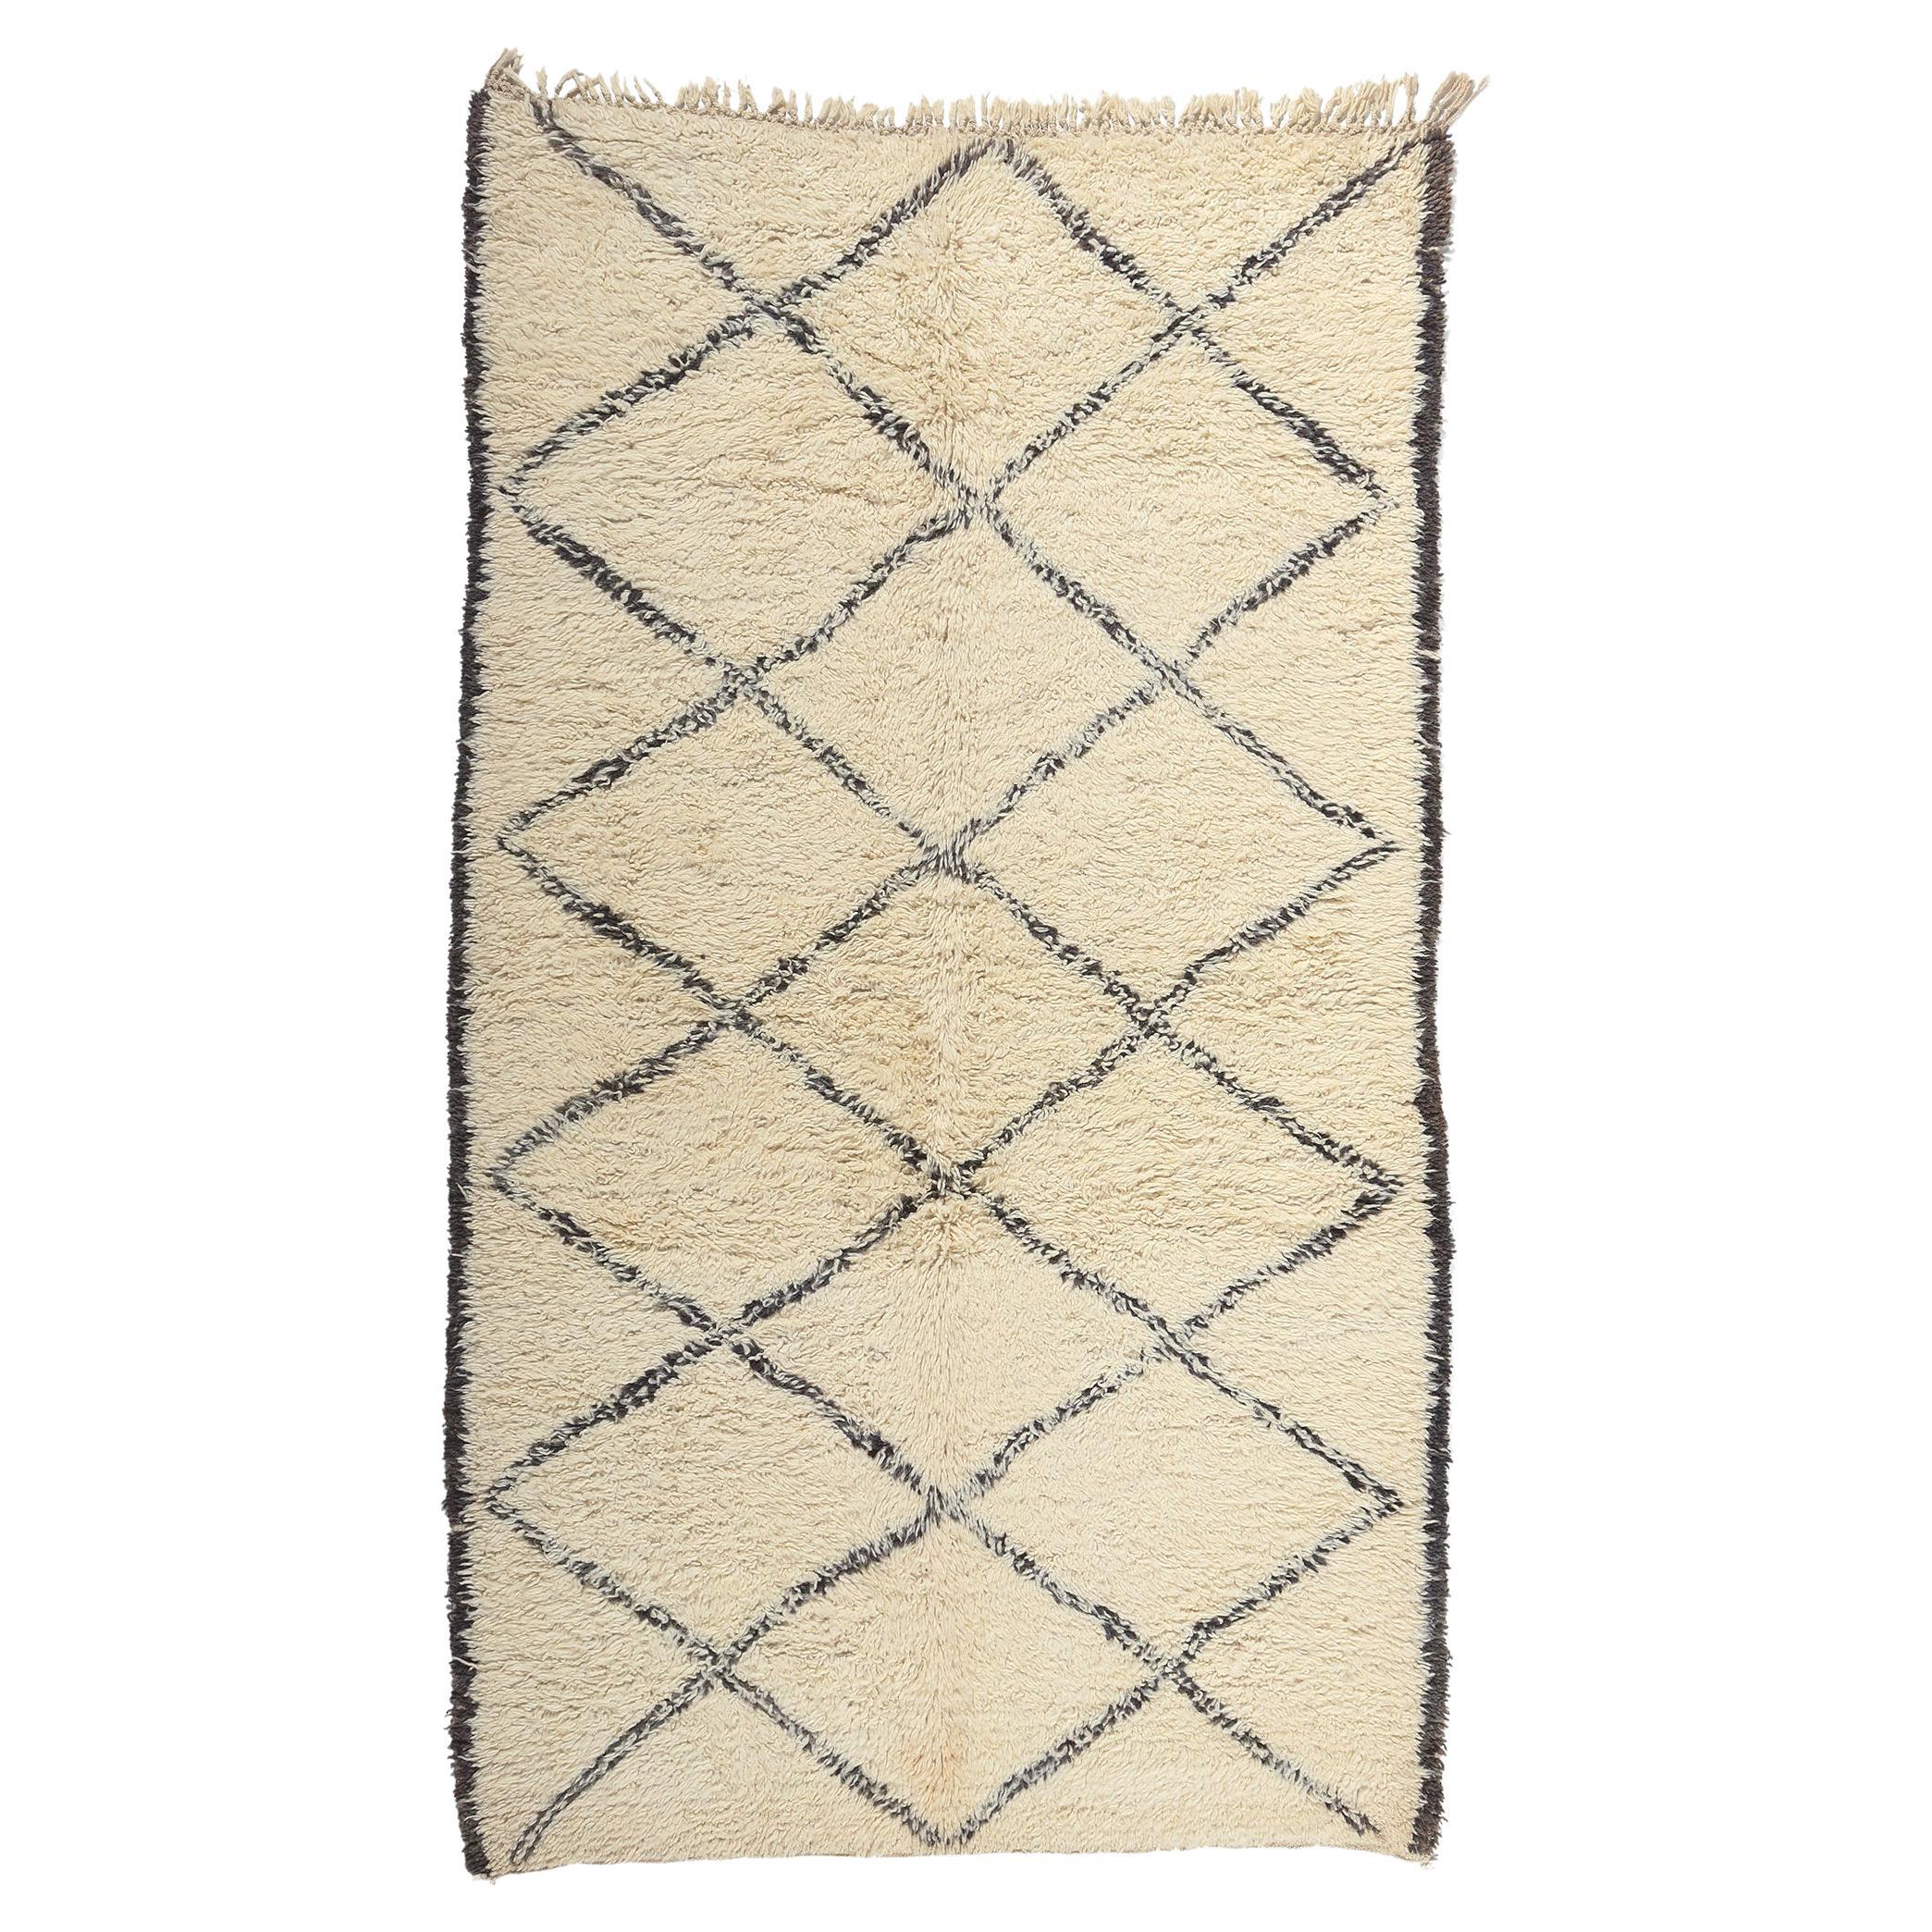 Vintage Moroccan Beni Ourain Rug, Midcentury Modern Meets Minimalist Style For Sale